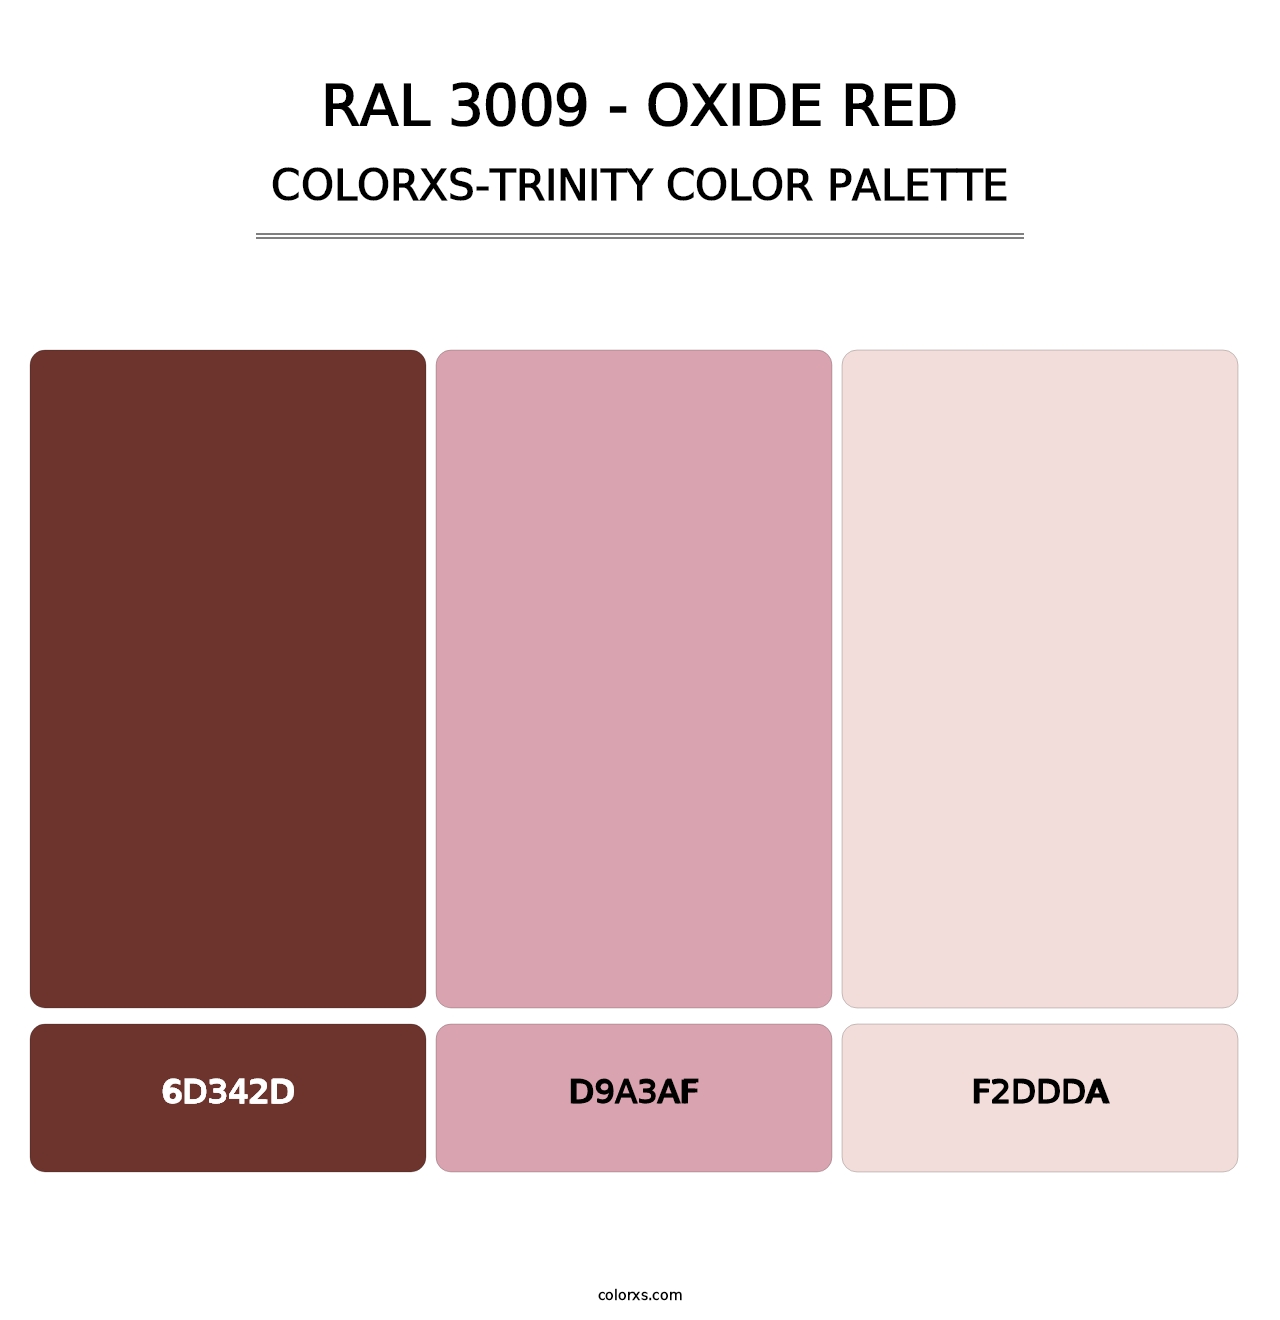 RAL 3009 - Oxide Red - Colorxs Trinity Palette